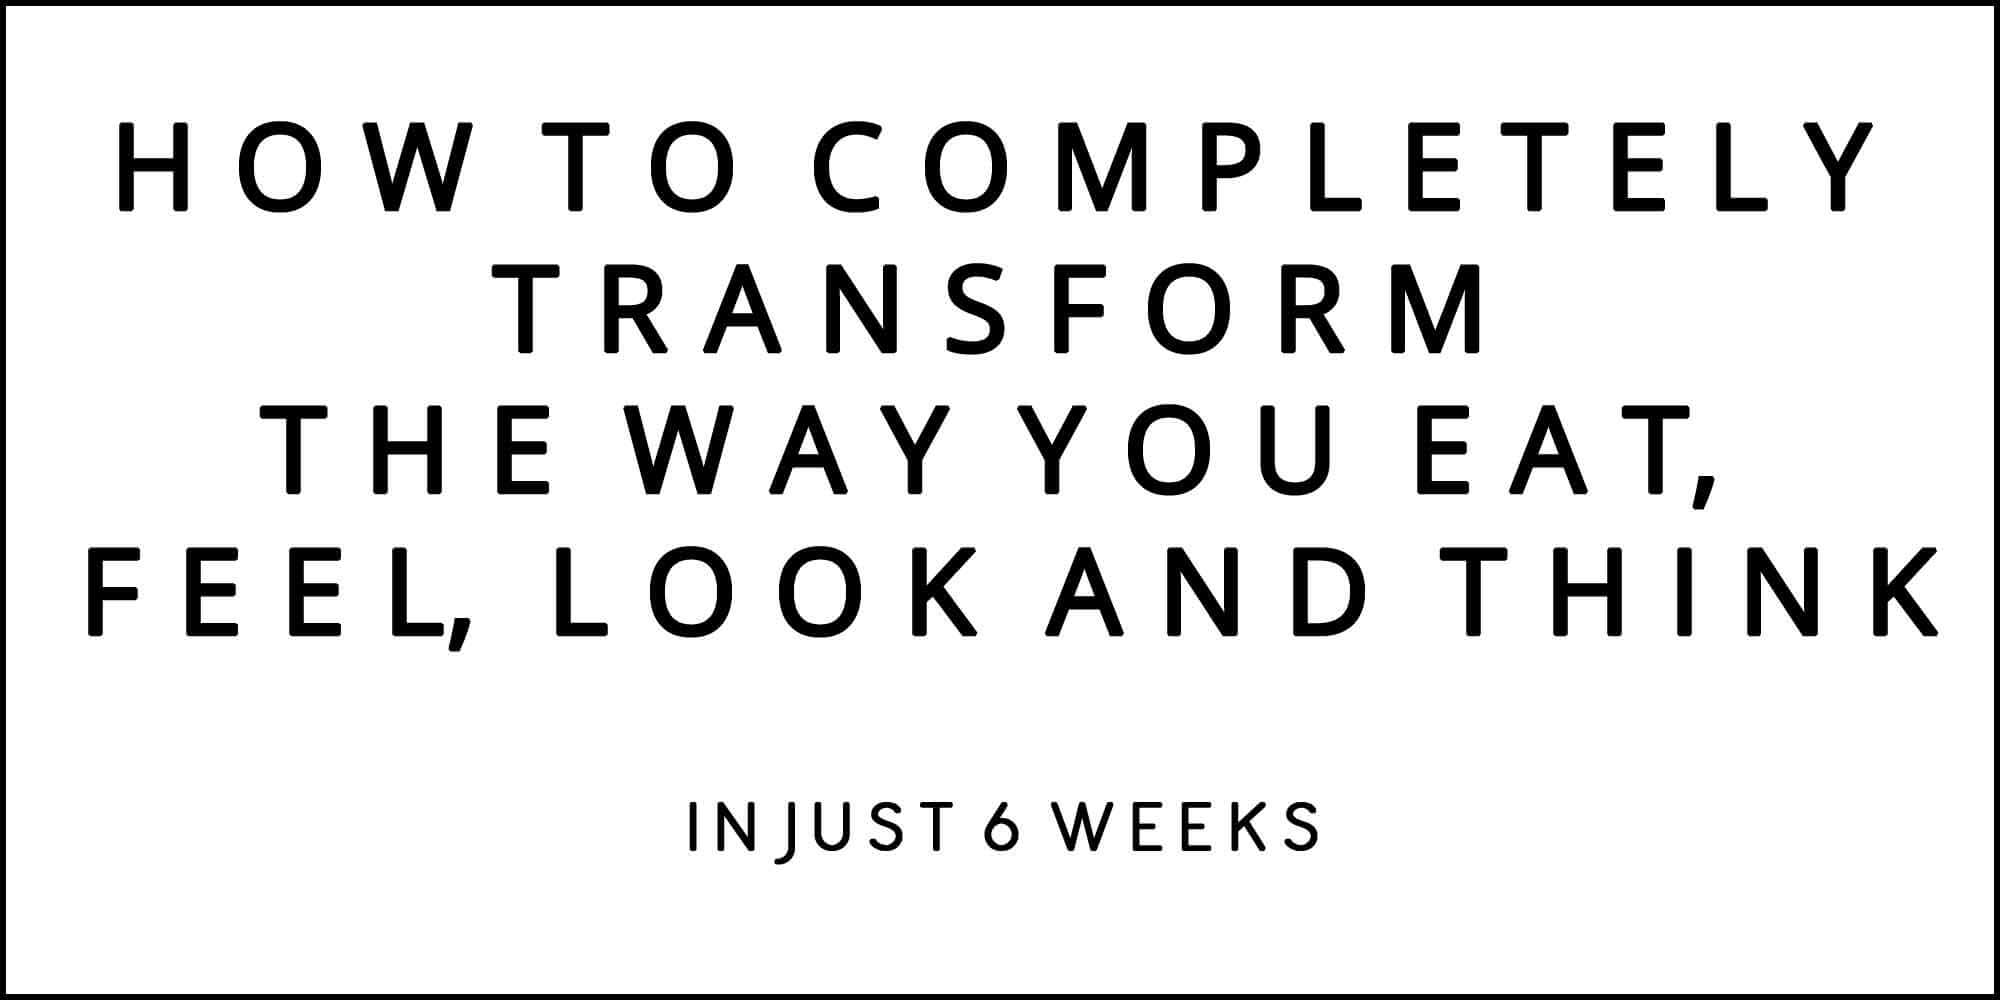 HOW TO COMPLETELY TRANSFORM THE WAY YOU EAT, FEEL, LOOK AND THINK